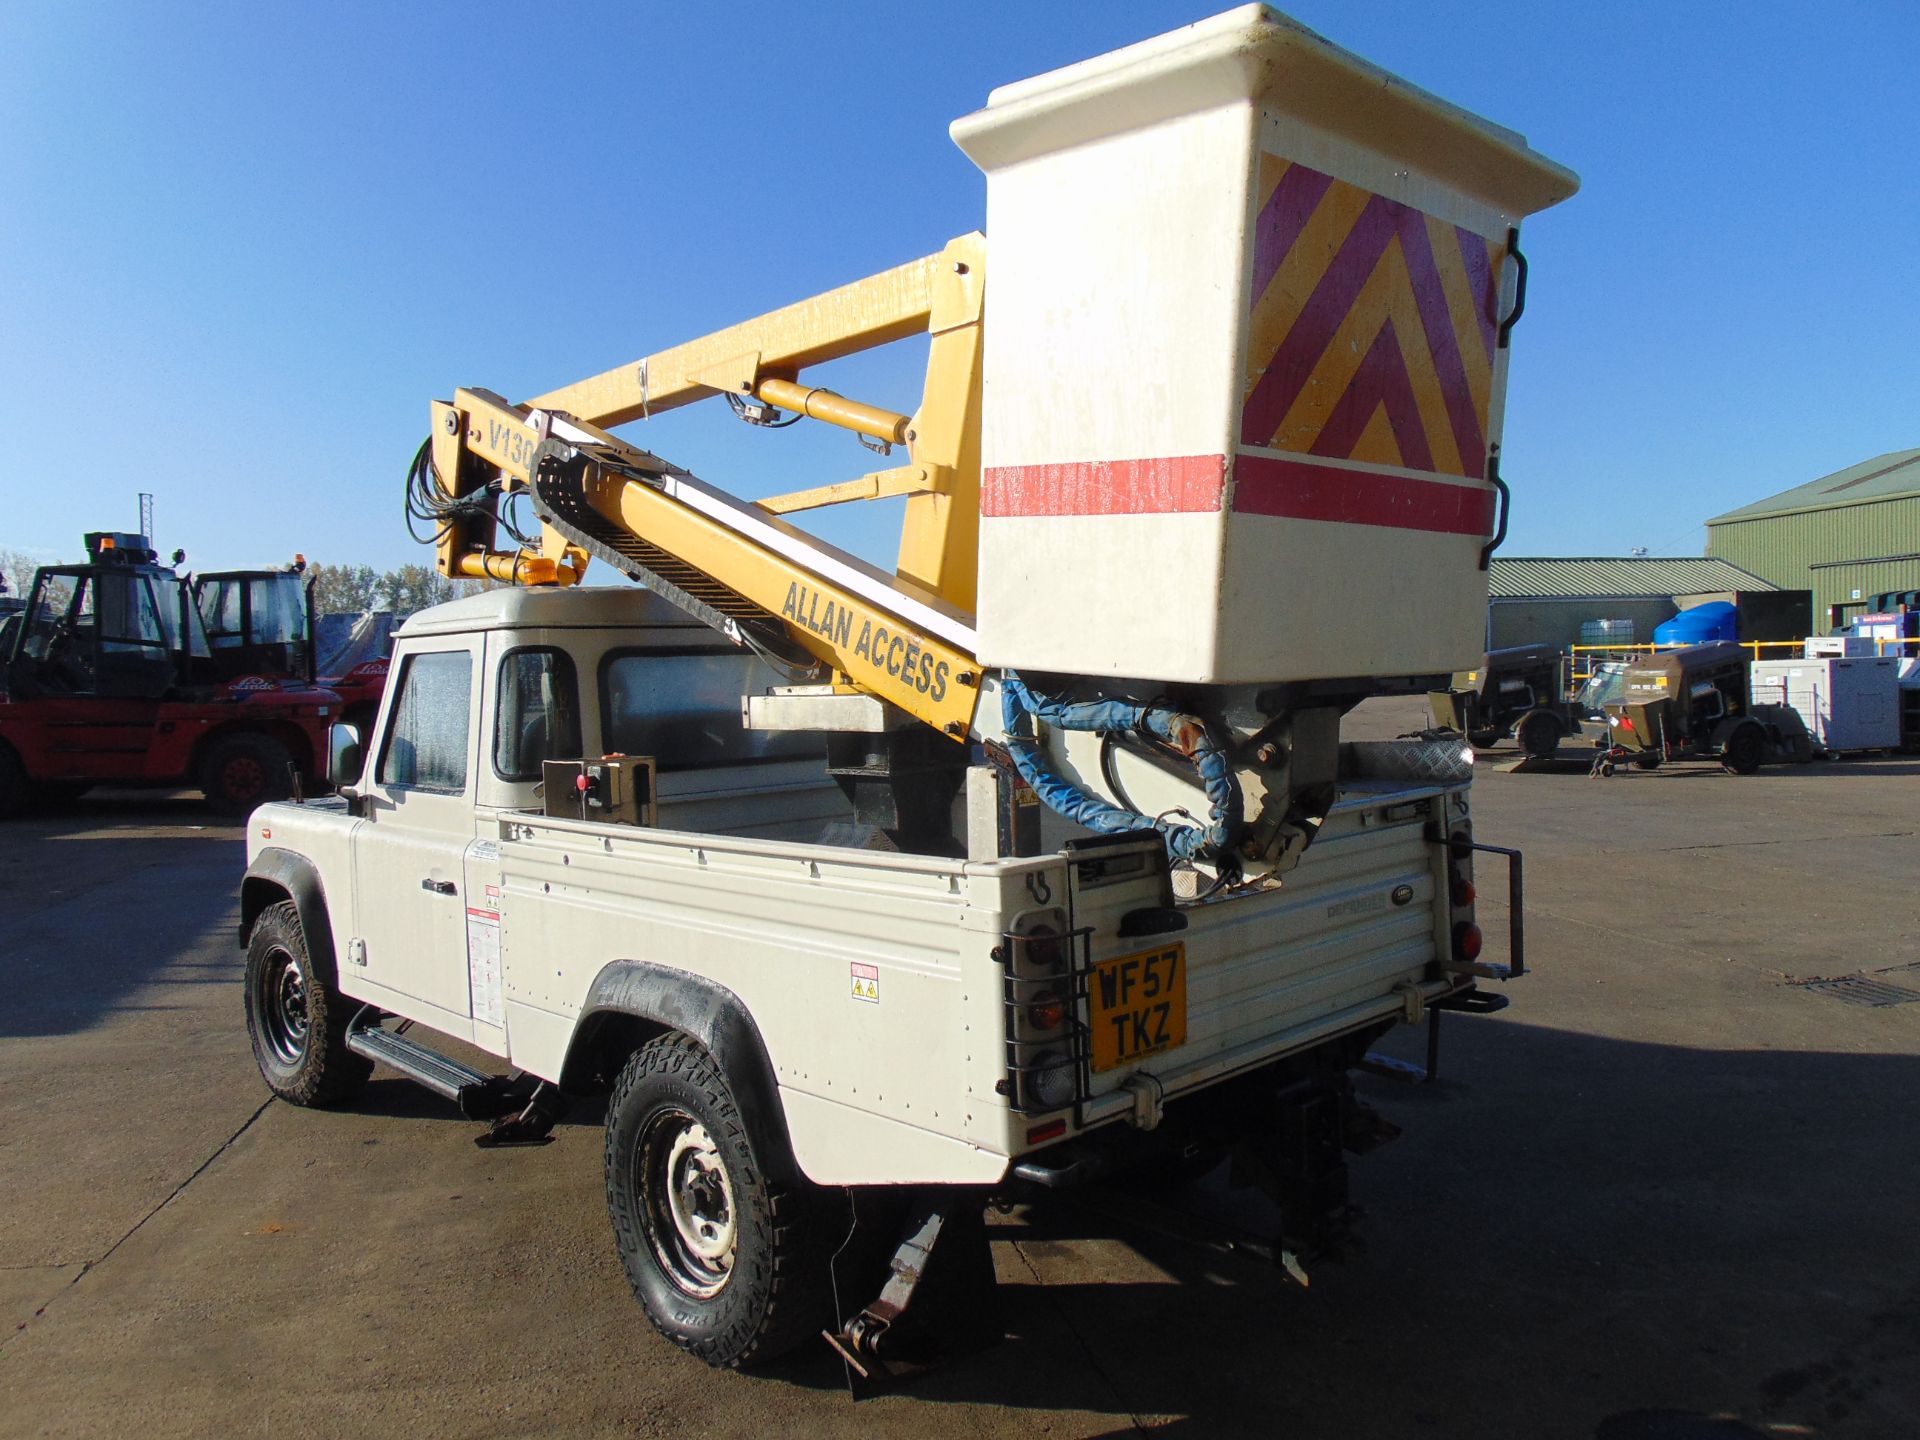 Land Rover Defender 110 High Capacity Cherry Picker - Image 8 of 23